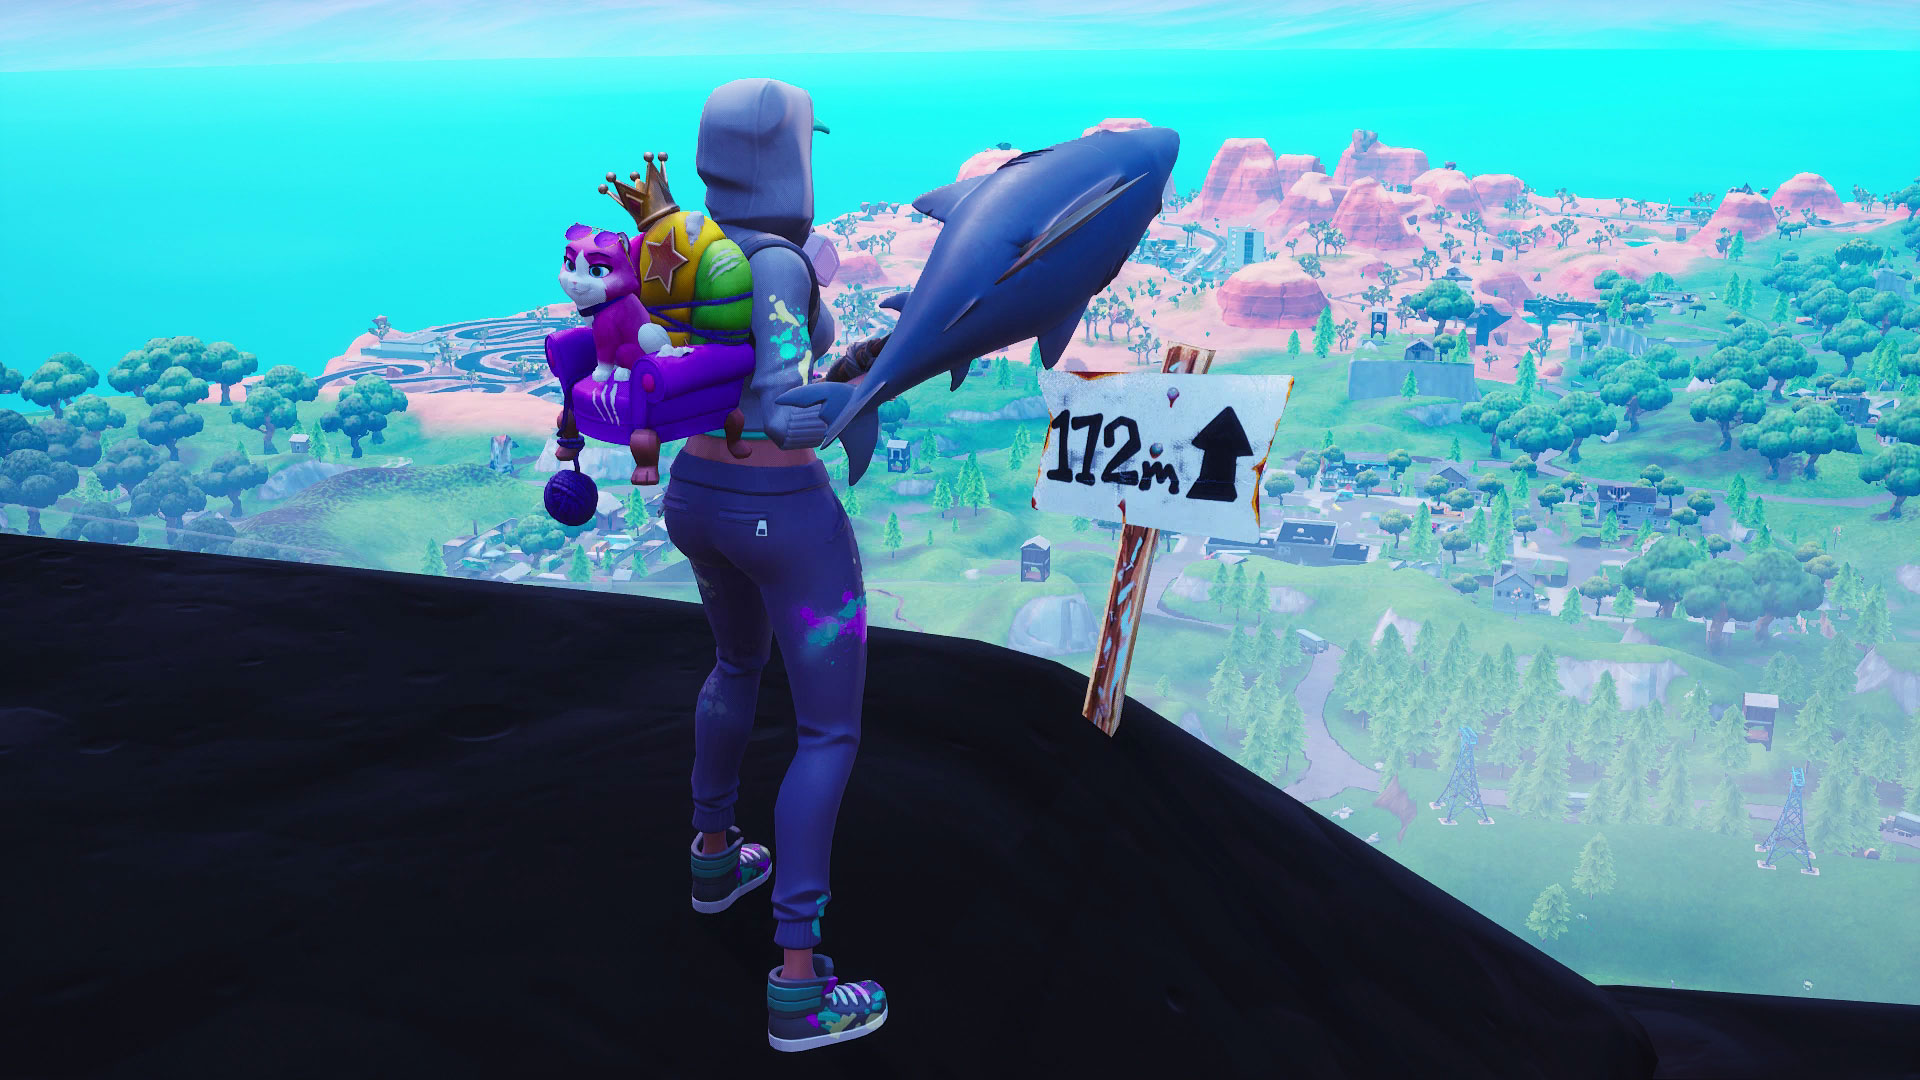 Where To Visit The 5 Highest Elevations On The Island In Fortnite - where to visit the 5 highest elevations on the island in fortnite season 8 week 6 challenge gamesradar